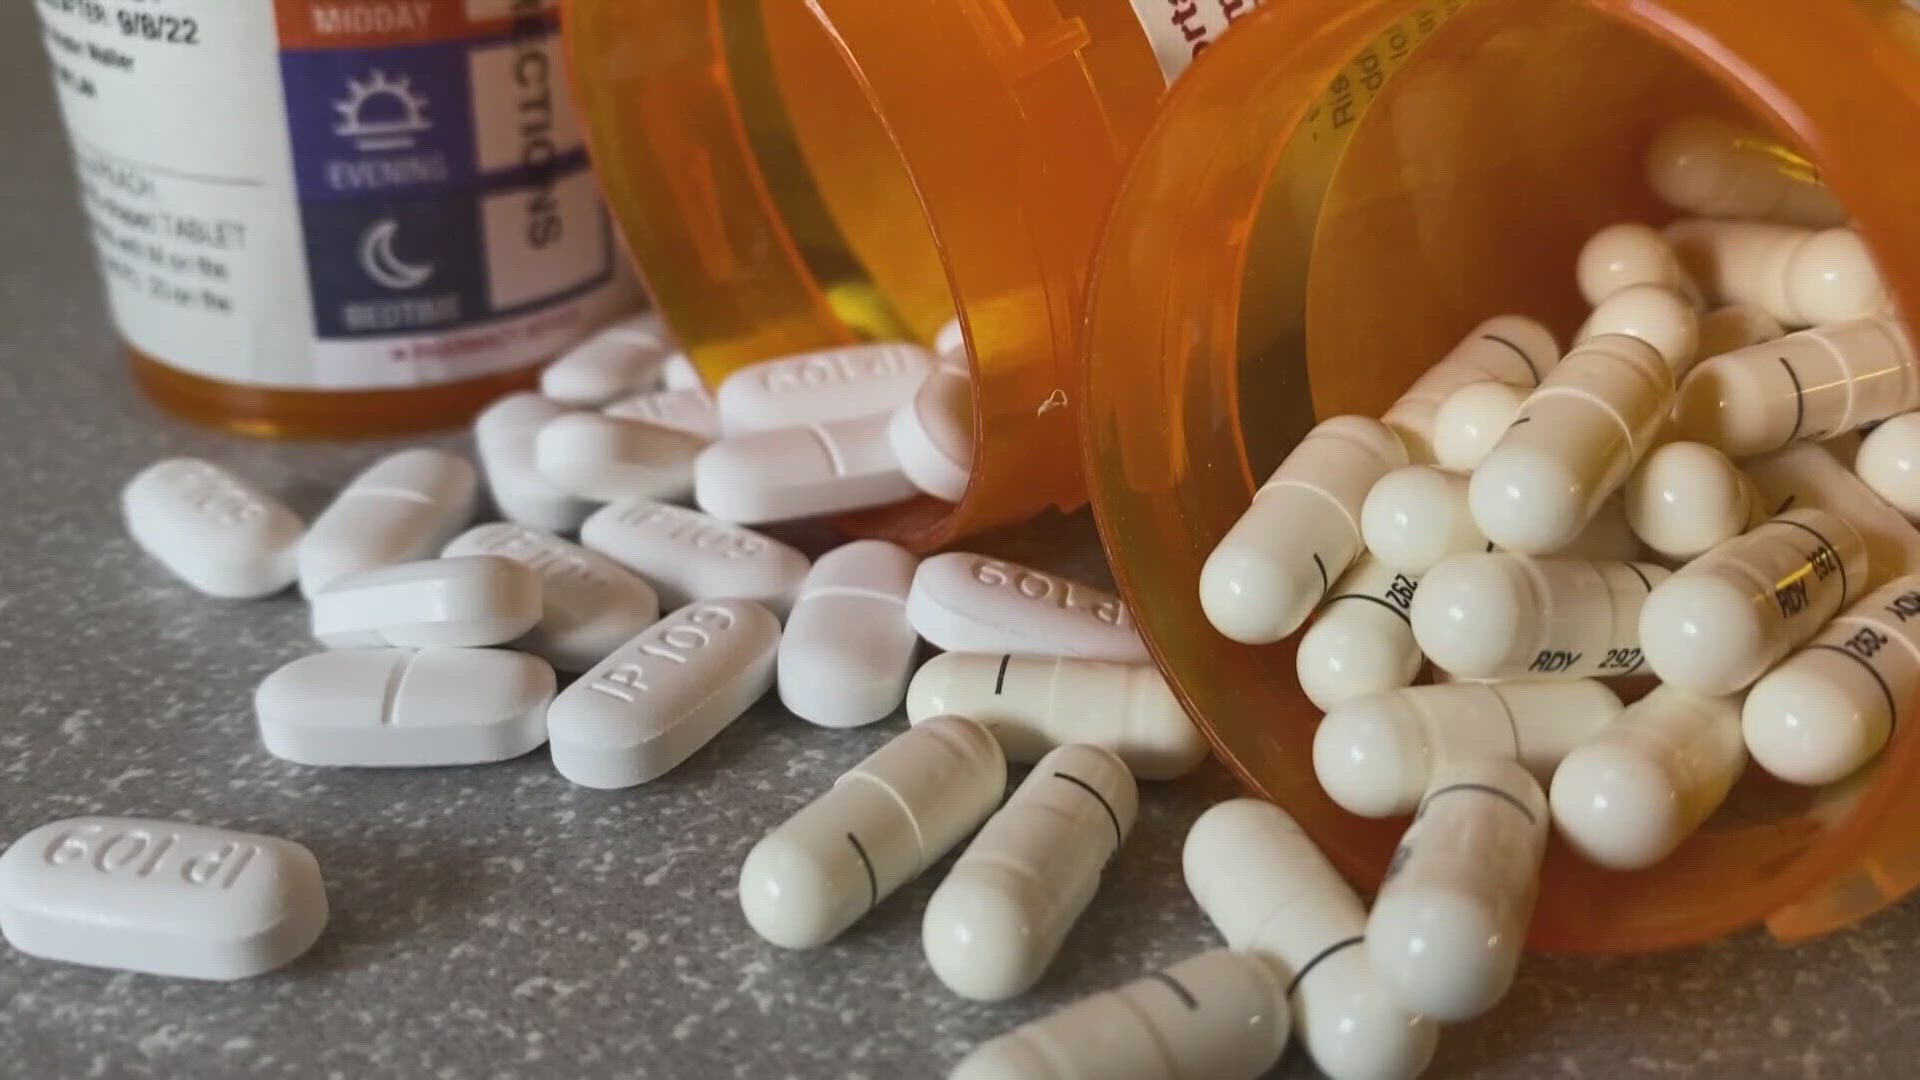 Mainers can drop off unwanted prescription drugs at local law enforcement agencies on Saturday, April 27.